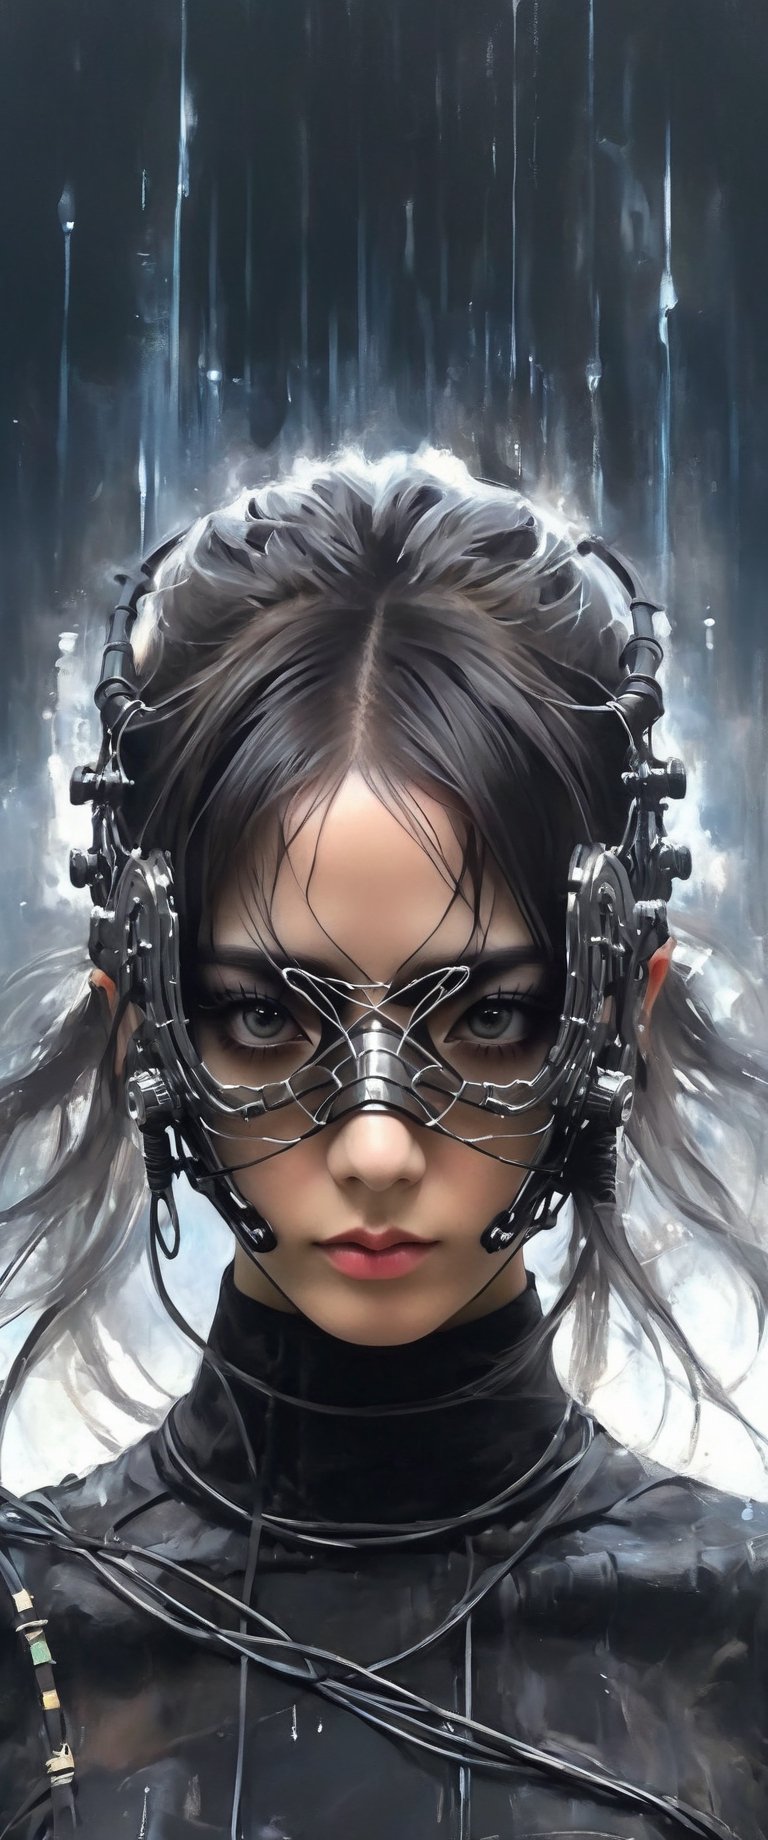 a girl standing on a deserted plateau with black clothing and wire mask, avant-garde portraiture, net art, sleek linest,aw0k nsfwfactory,aw0k magnstyle,danknis,sooyaaa,Anime ,cyborg style,4nime style,dlwlrma,korean girl,Gric,ice and water,greg rutkowski,Renaissance Sci-Fi Fantasy,beyond_the_black_rainbow